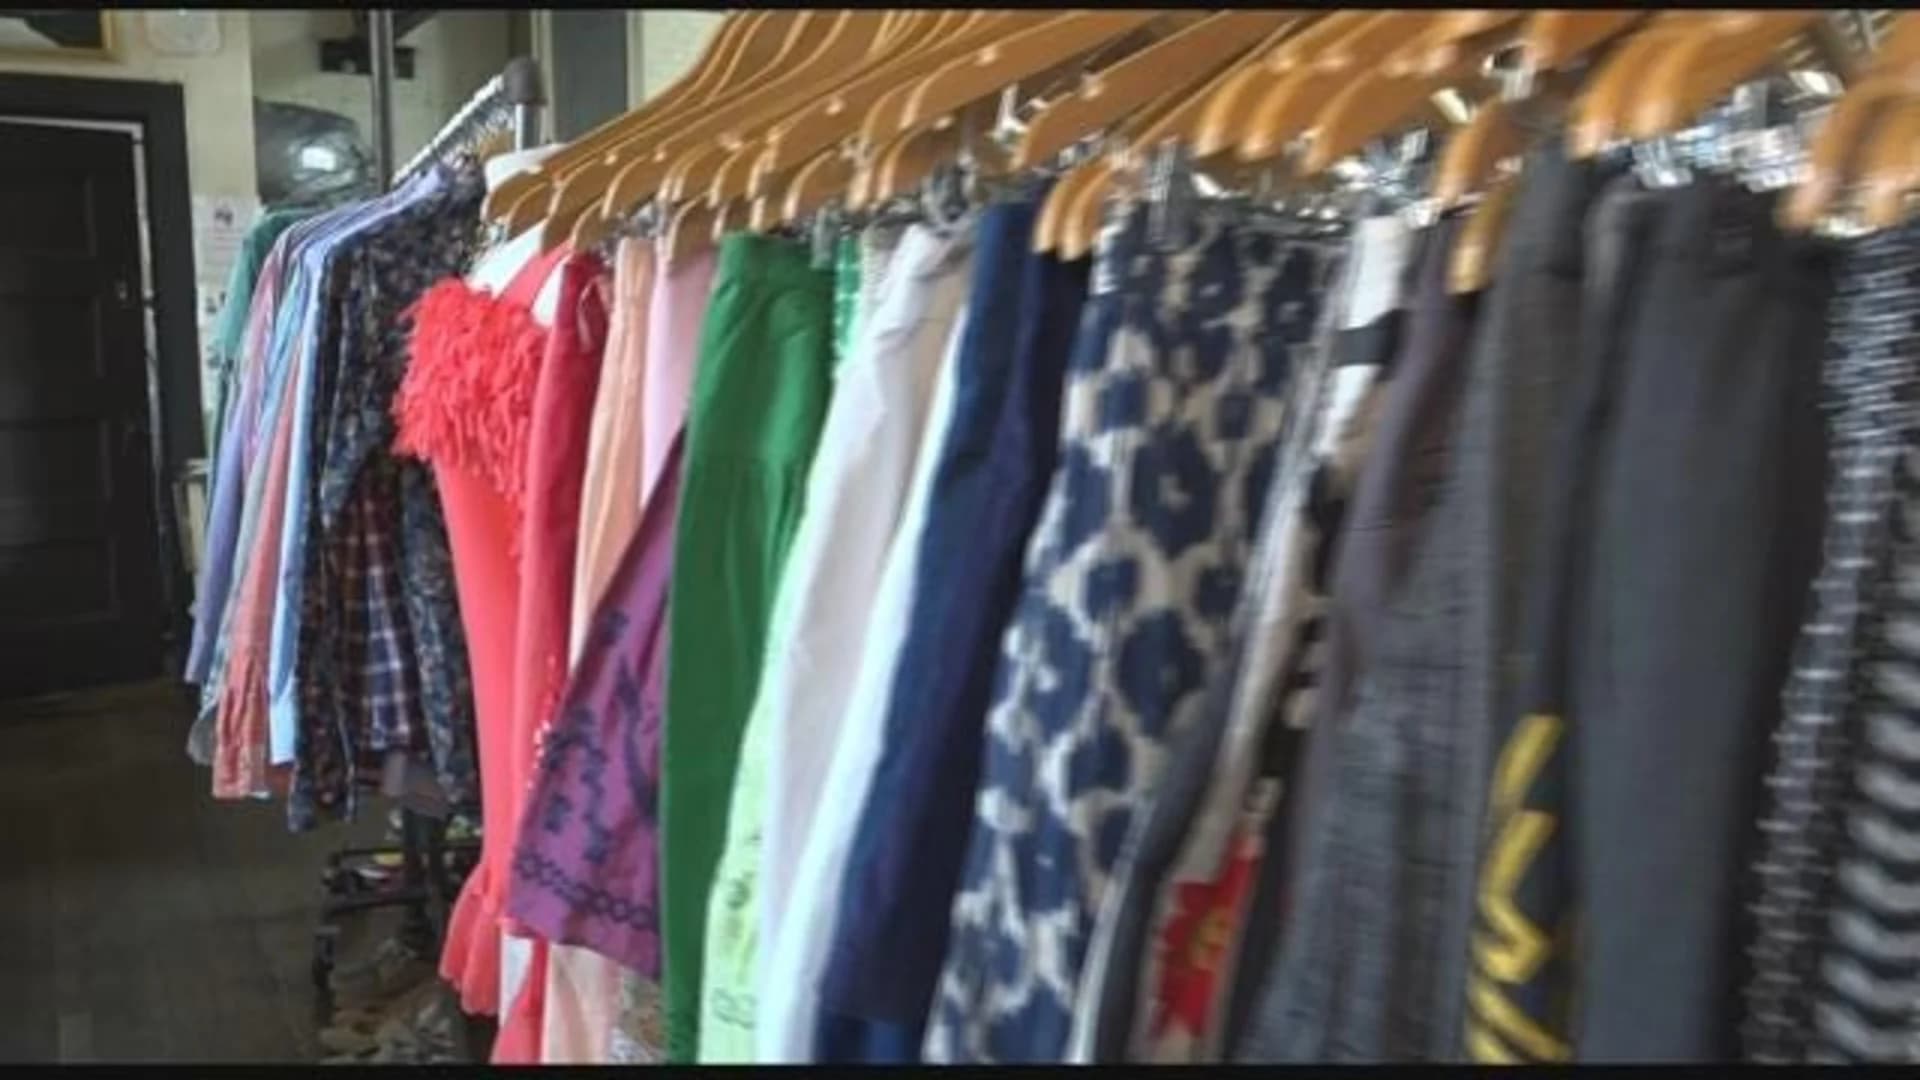 Plymouth Church honors history of social justice with Underground Thrift Store